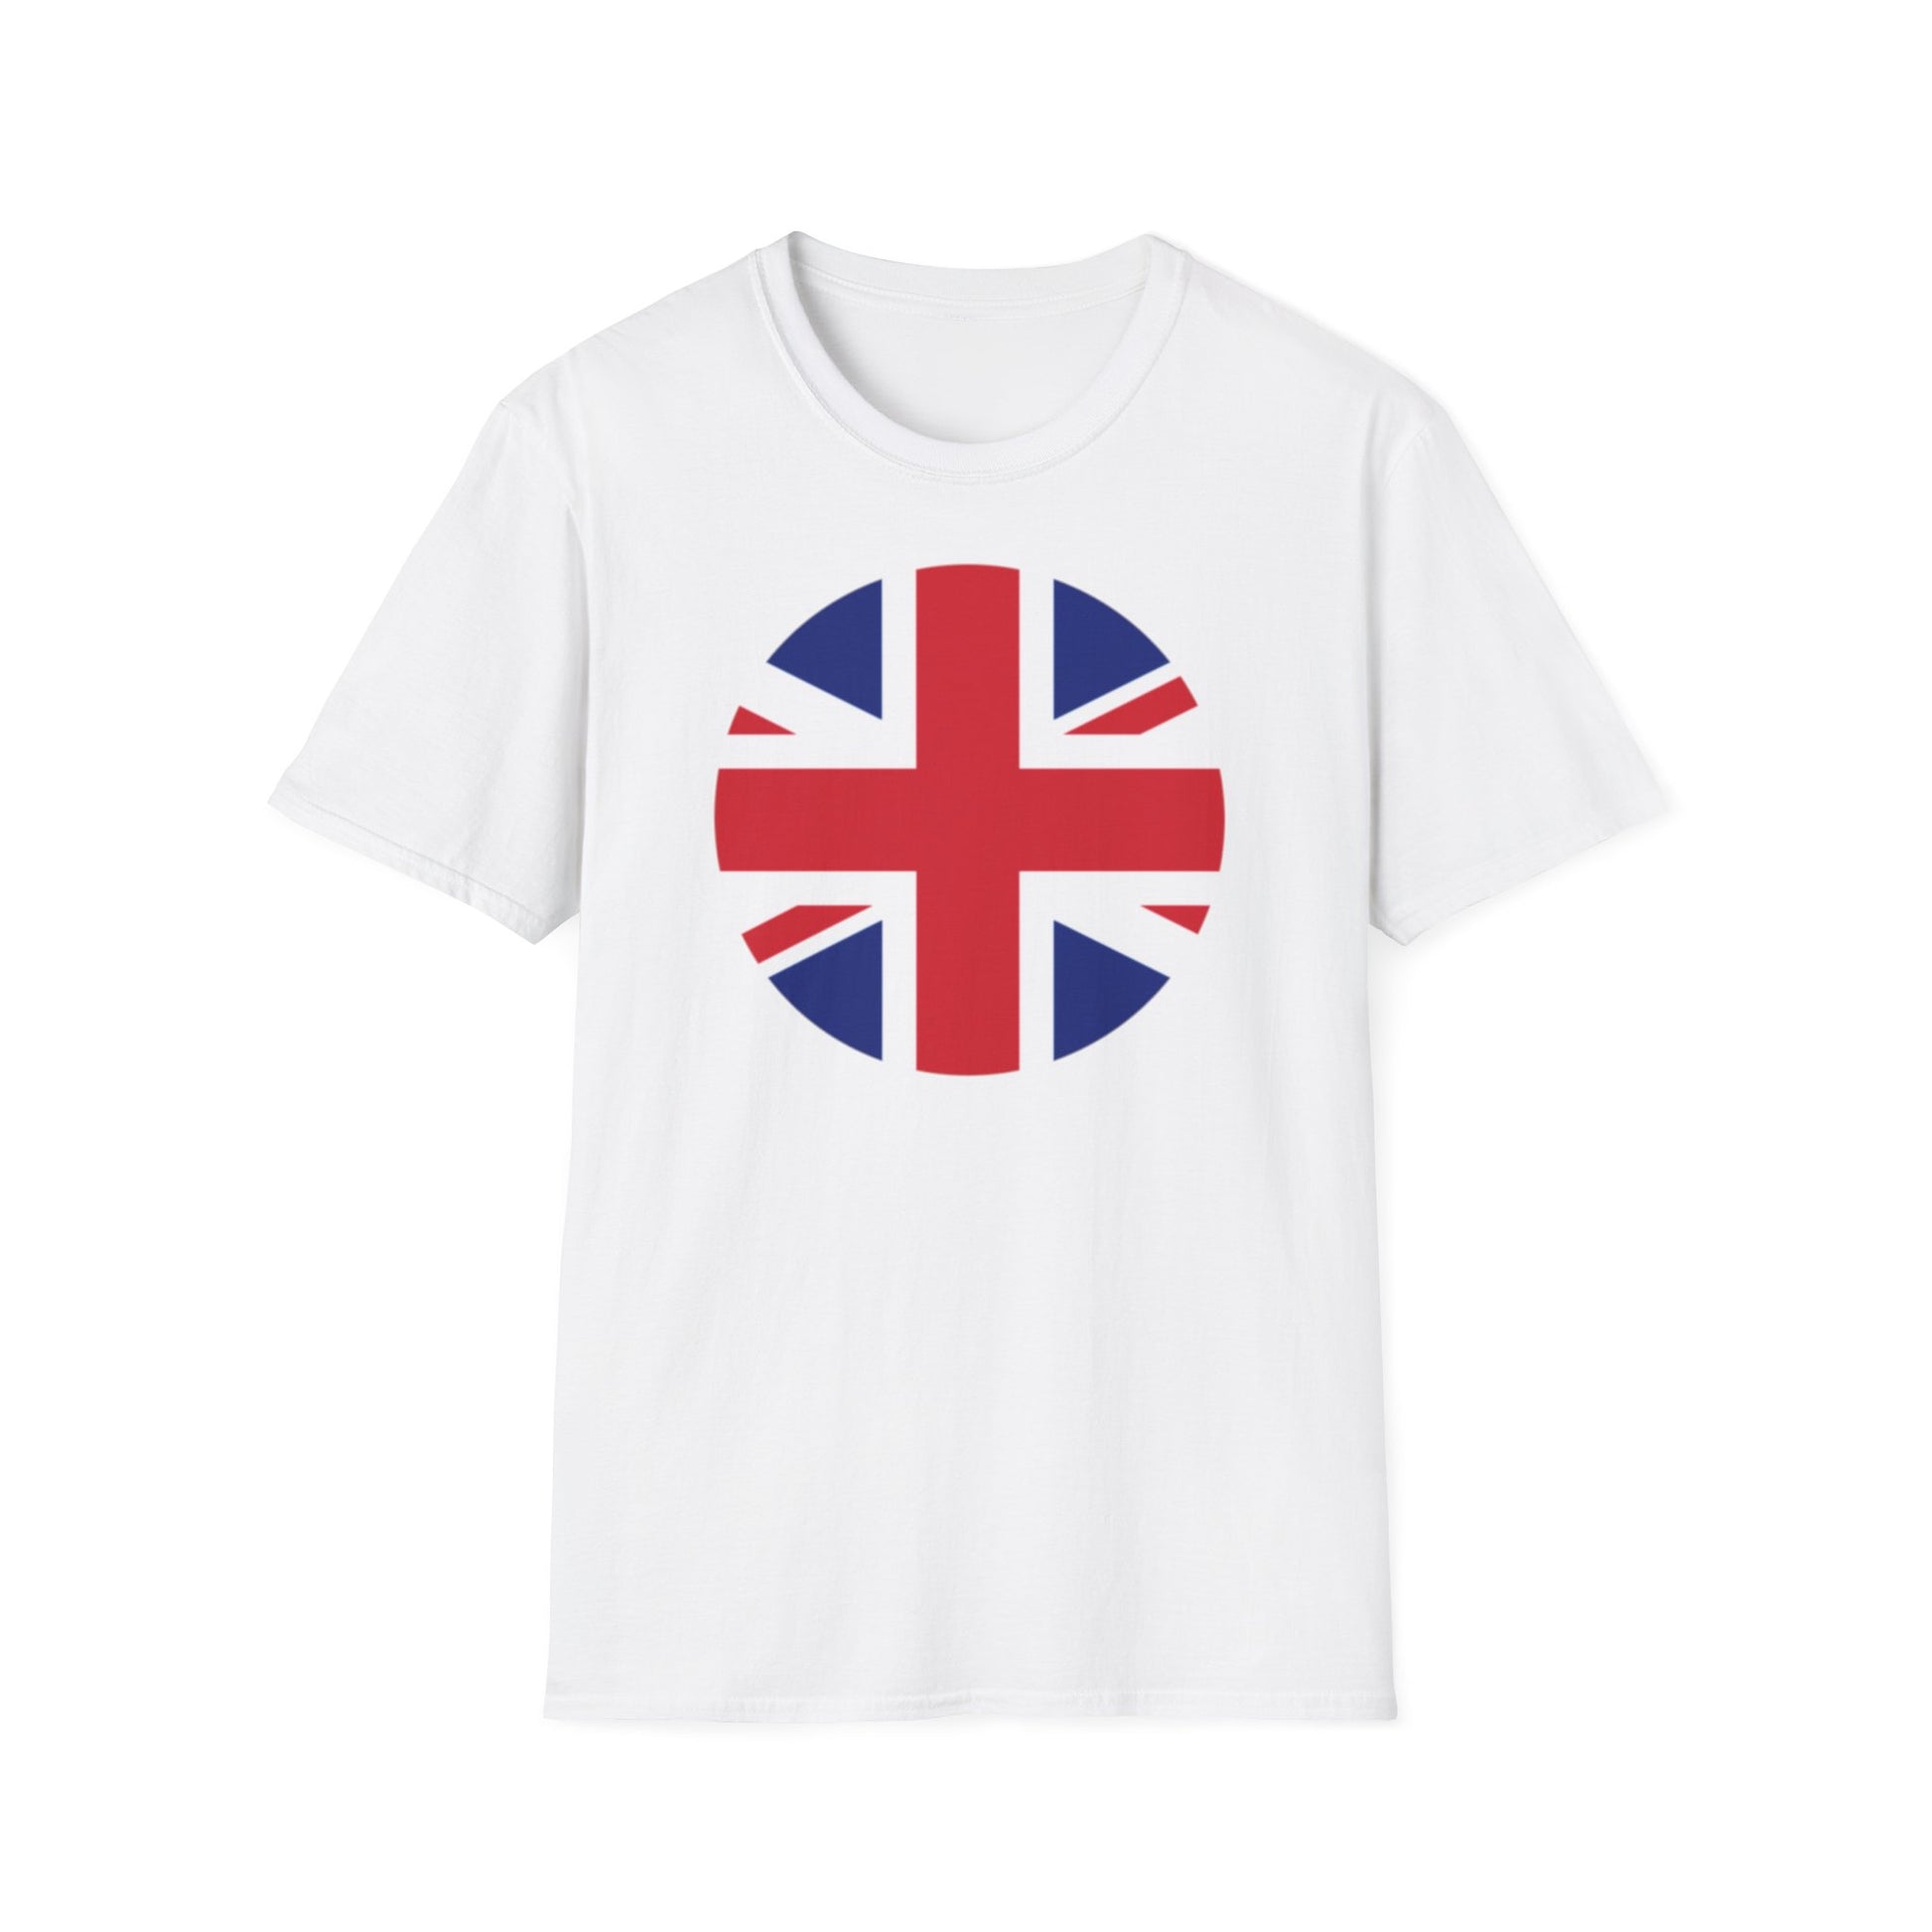 A white t-shirt with a design of a Union Jack flag in a round circle shape